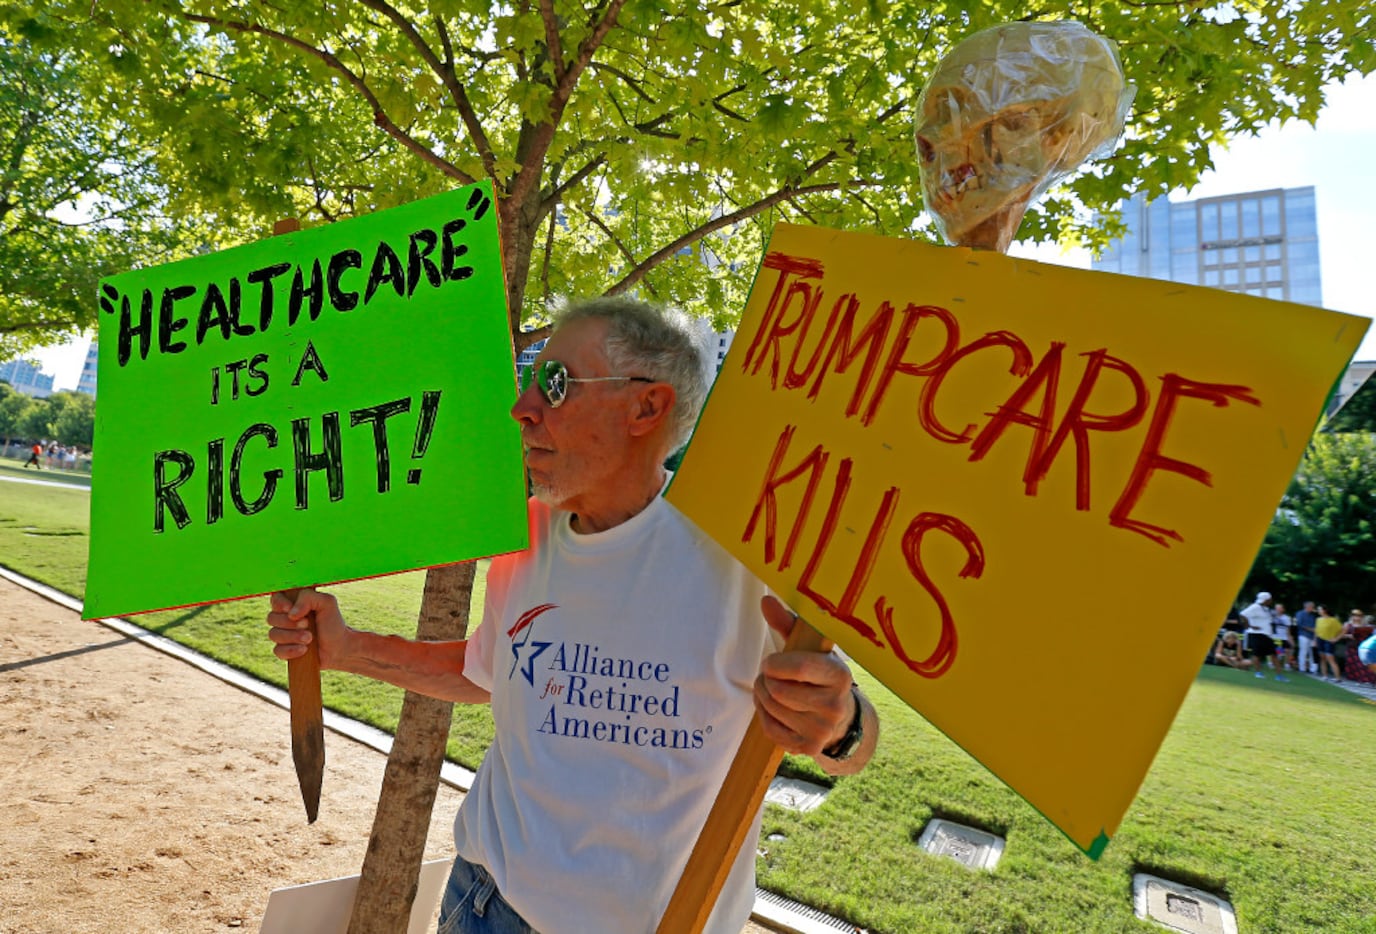 Protester Zen Biasco holds signs during a "Rally for Healthcare" event organized by the...